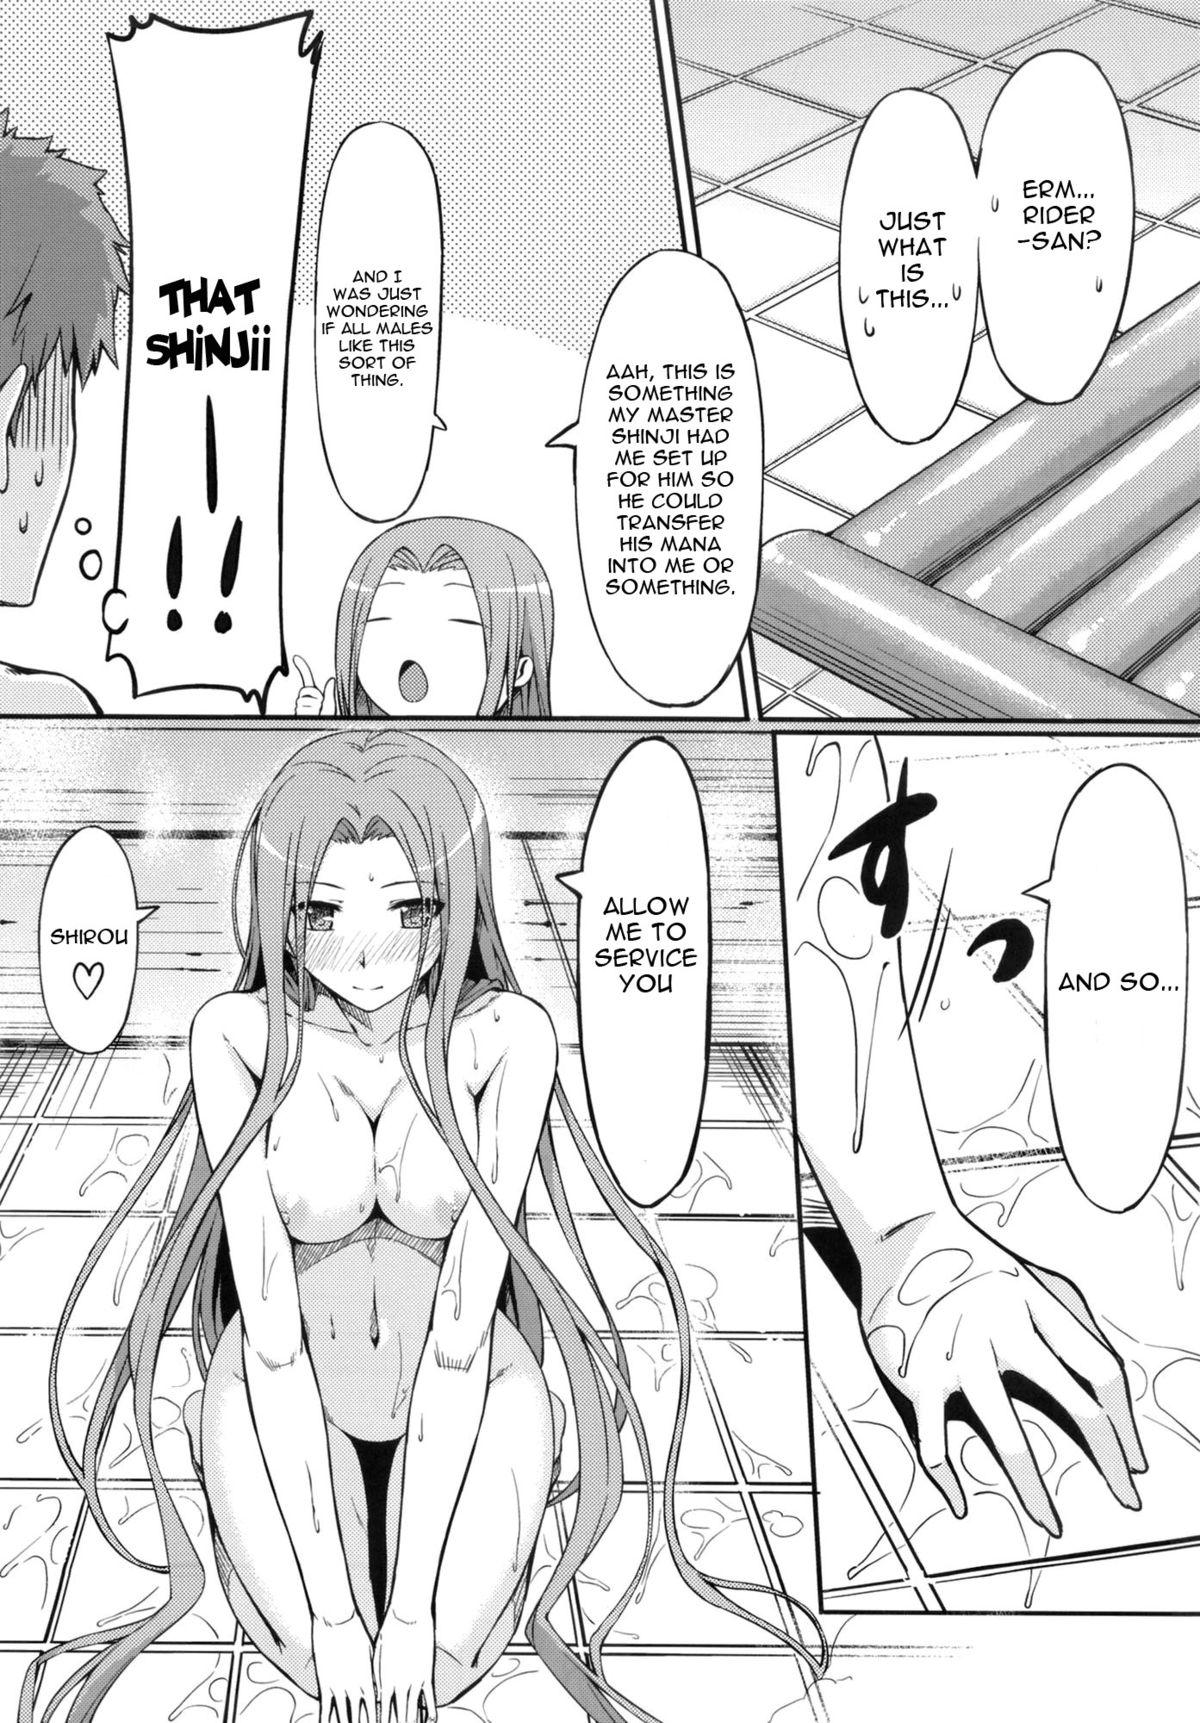 Stripping Rider san to Ofuro. | Bathing with Rider-san. - Fate stay night Fate hollow ataraxia Gay Cock - Page 6